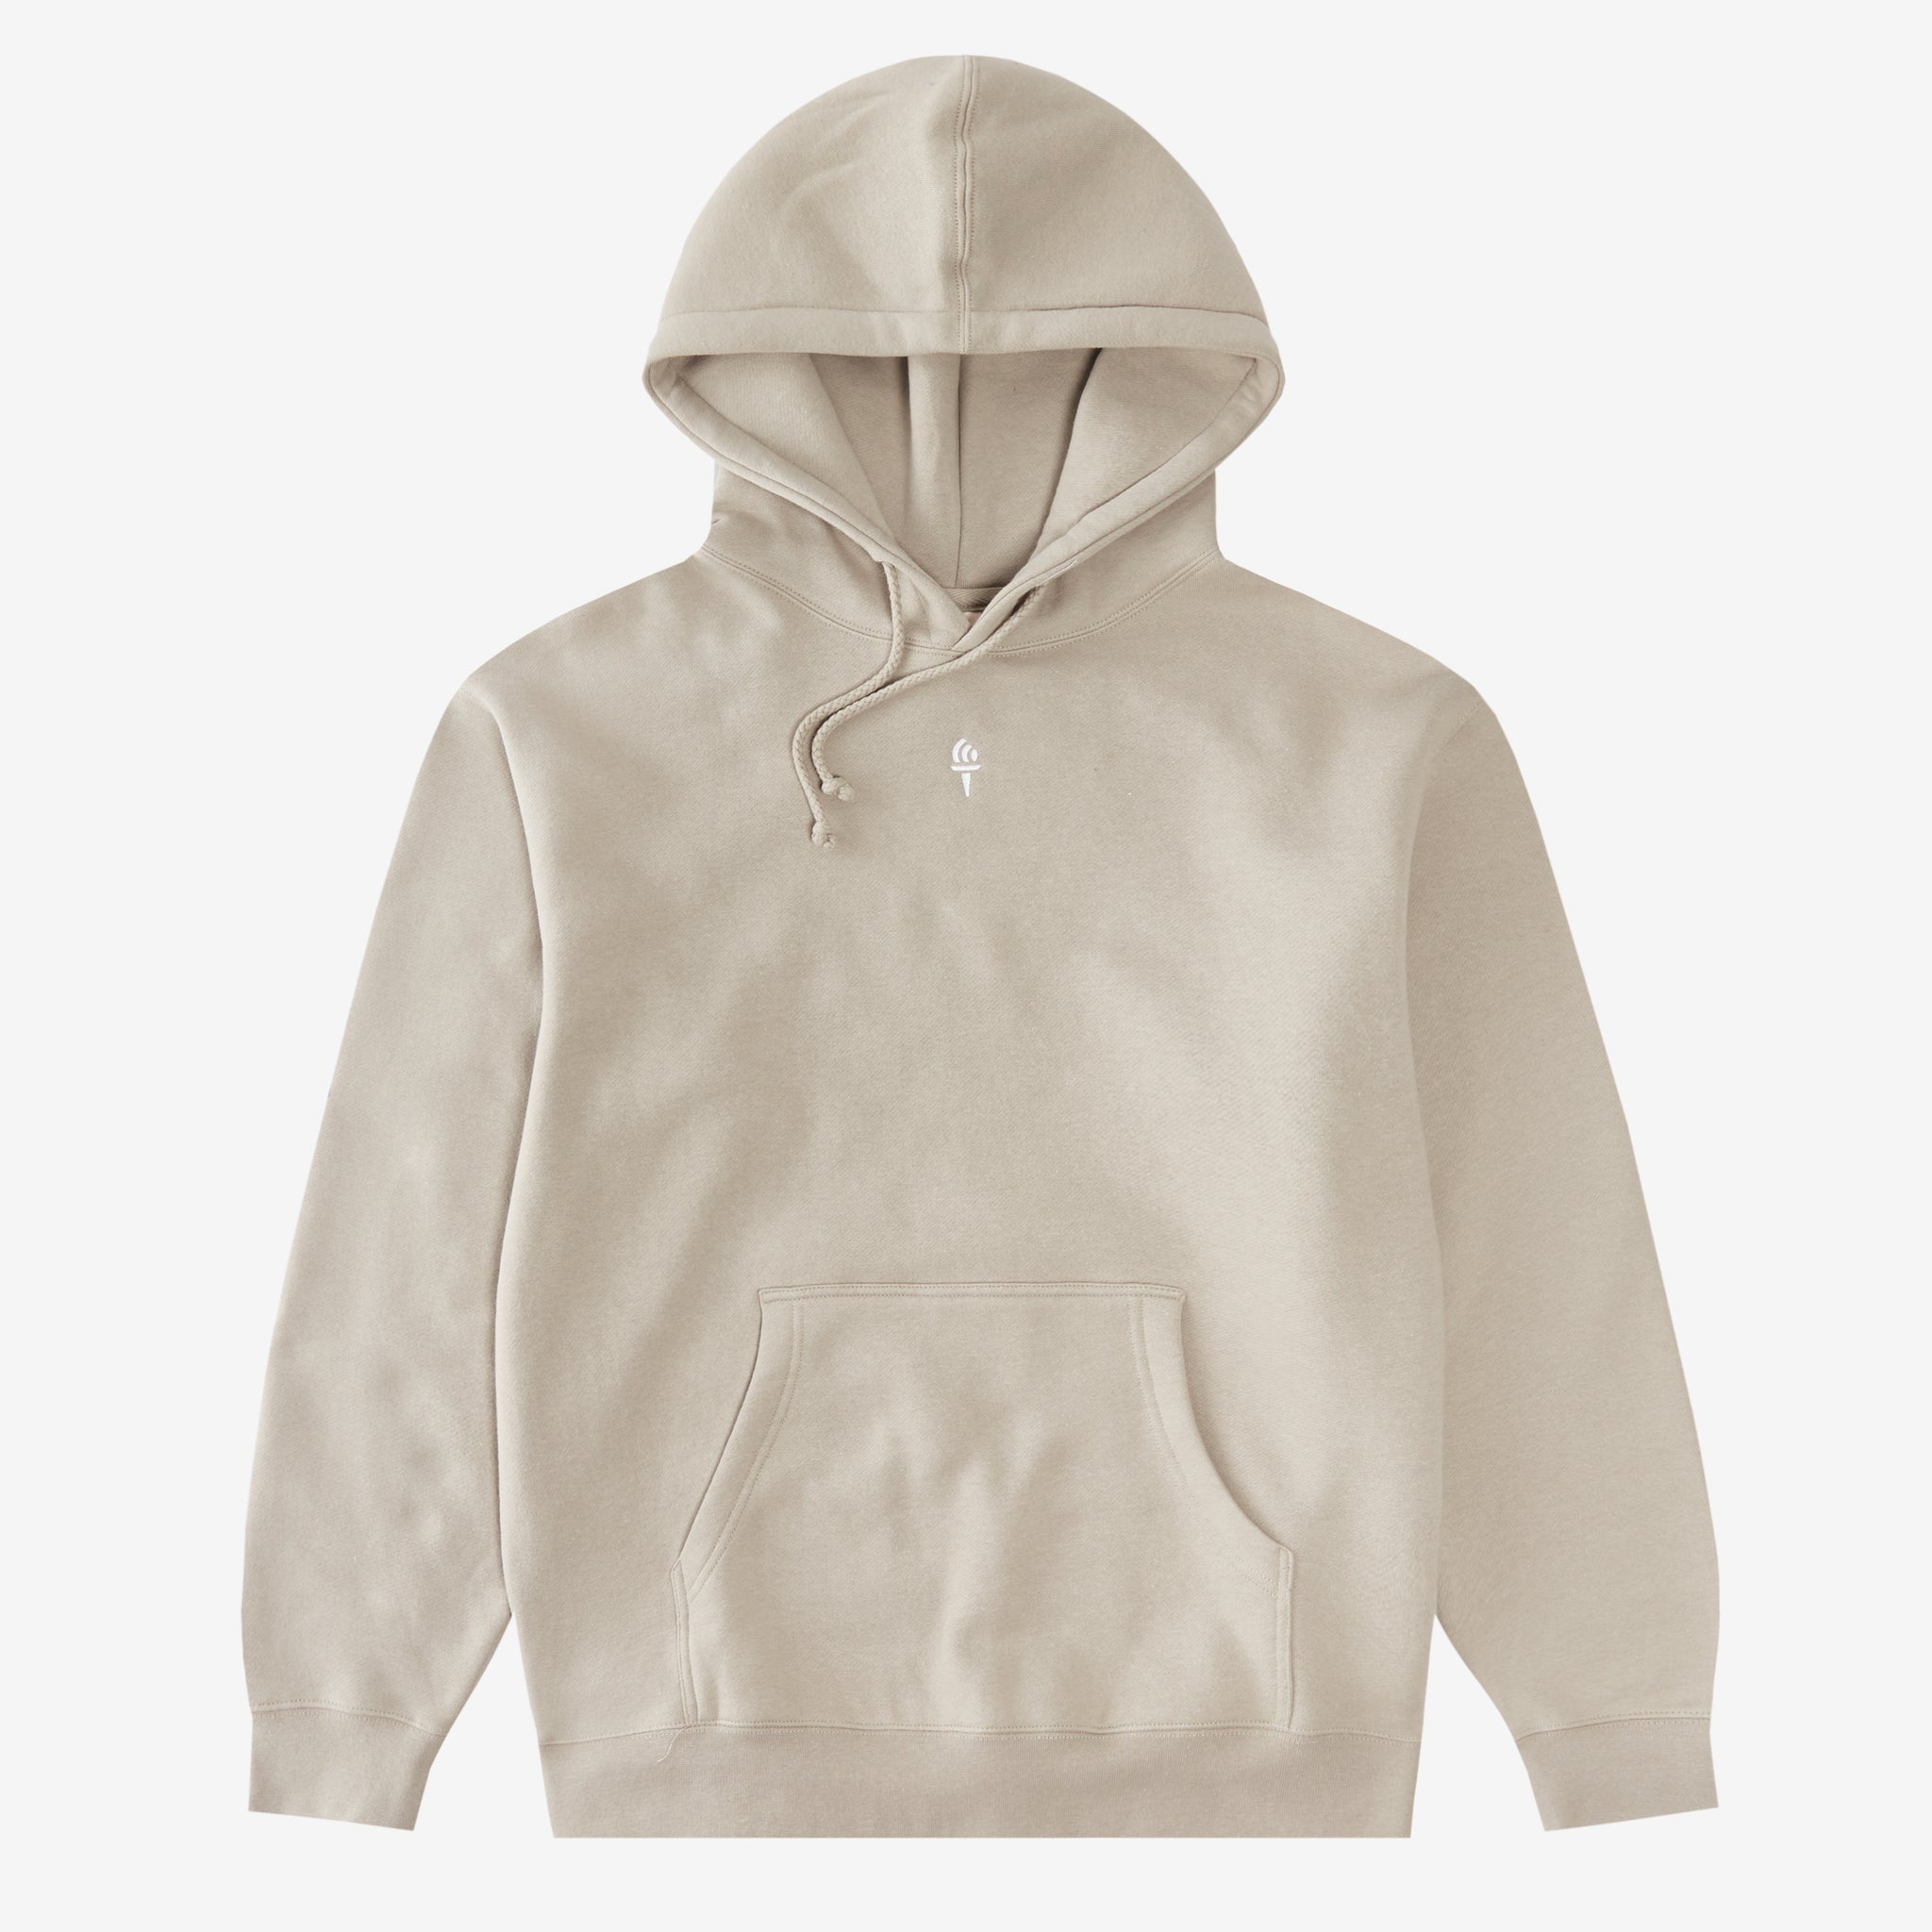 Torch Hoody - Cement